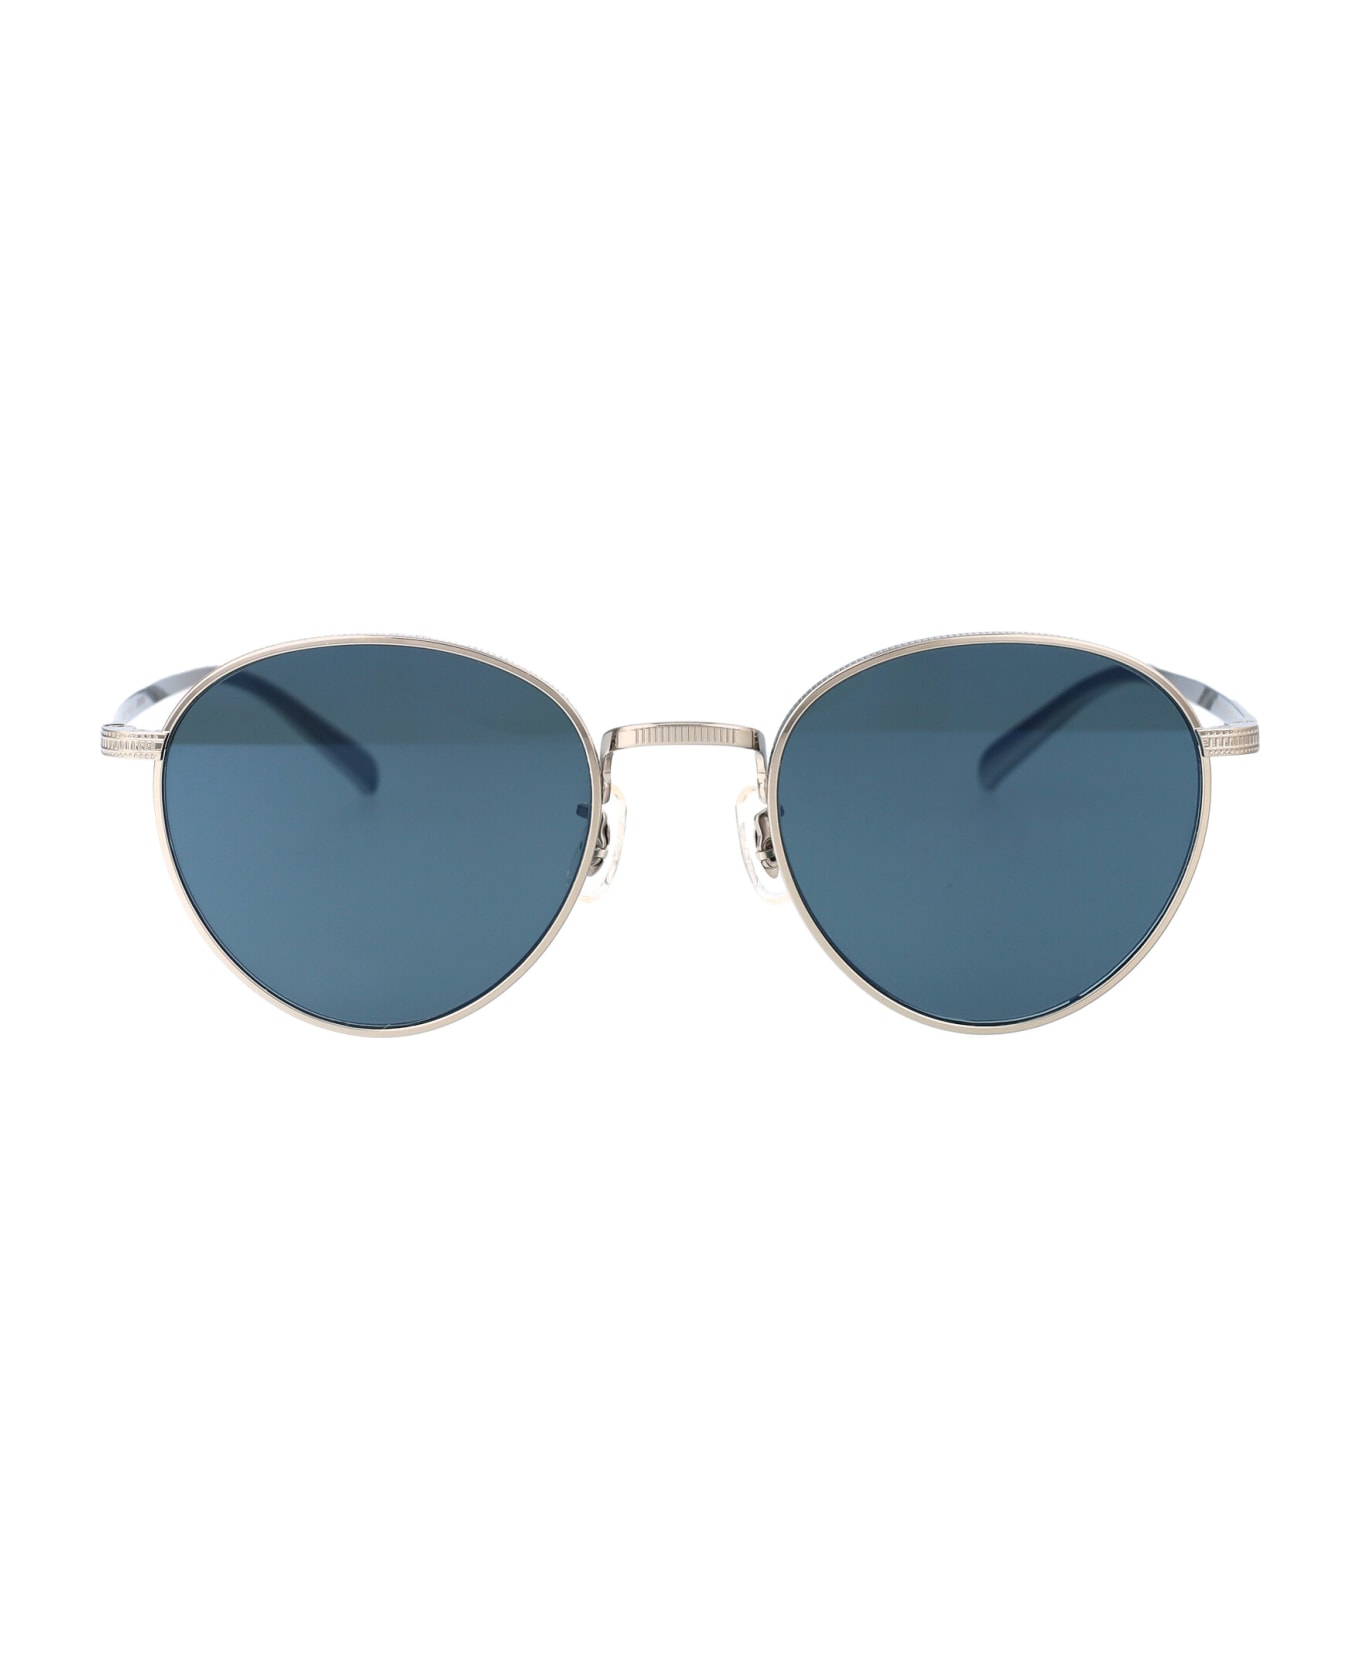 Oliver Peoples Rhydian Sunglasses - 5036W5 Silver